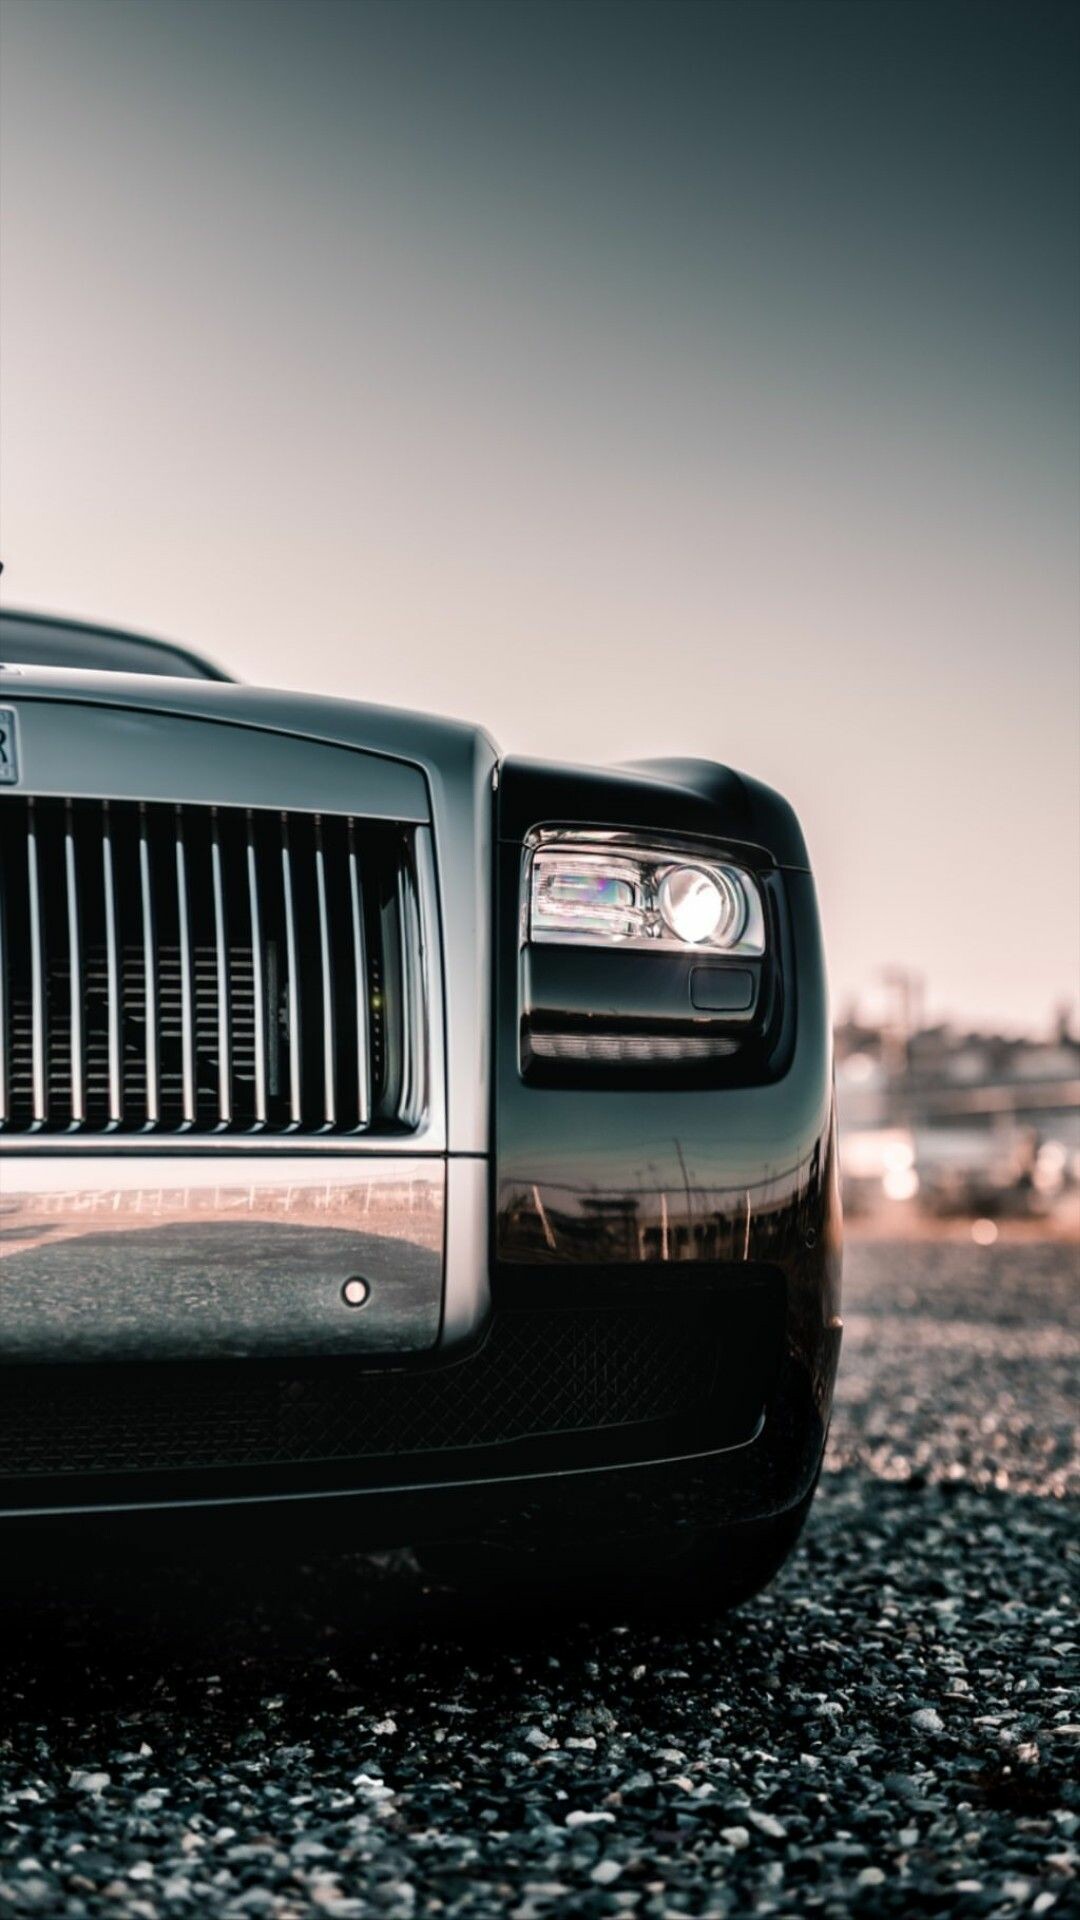 Rolls-Royce: A British luxury car manufacturer, created in 1973, Ghost. 1080x1920 Full HD Wallpaper.